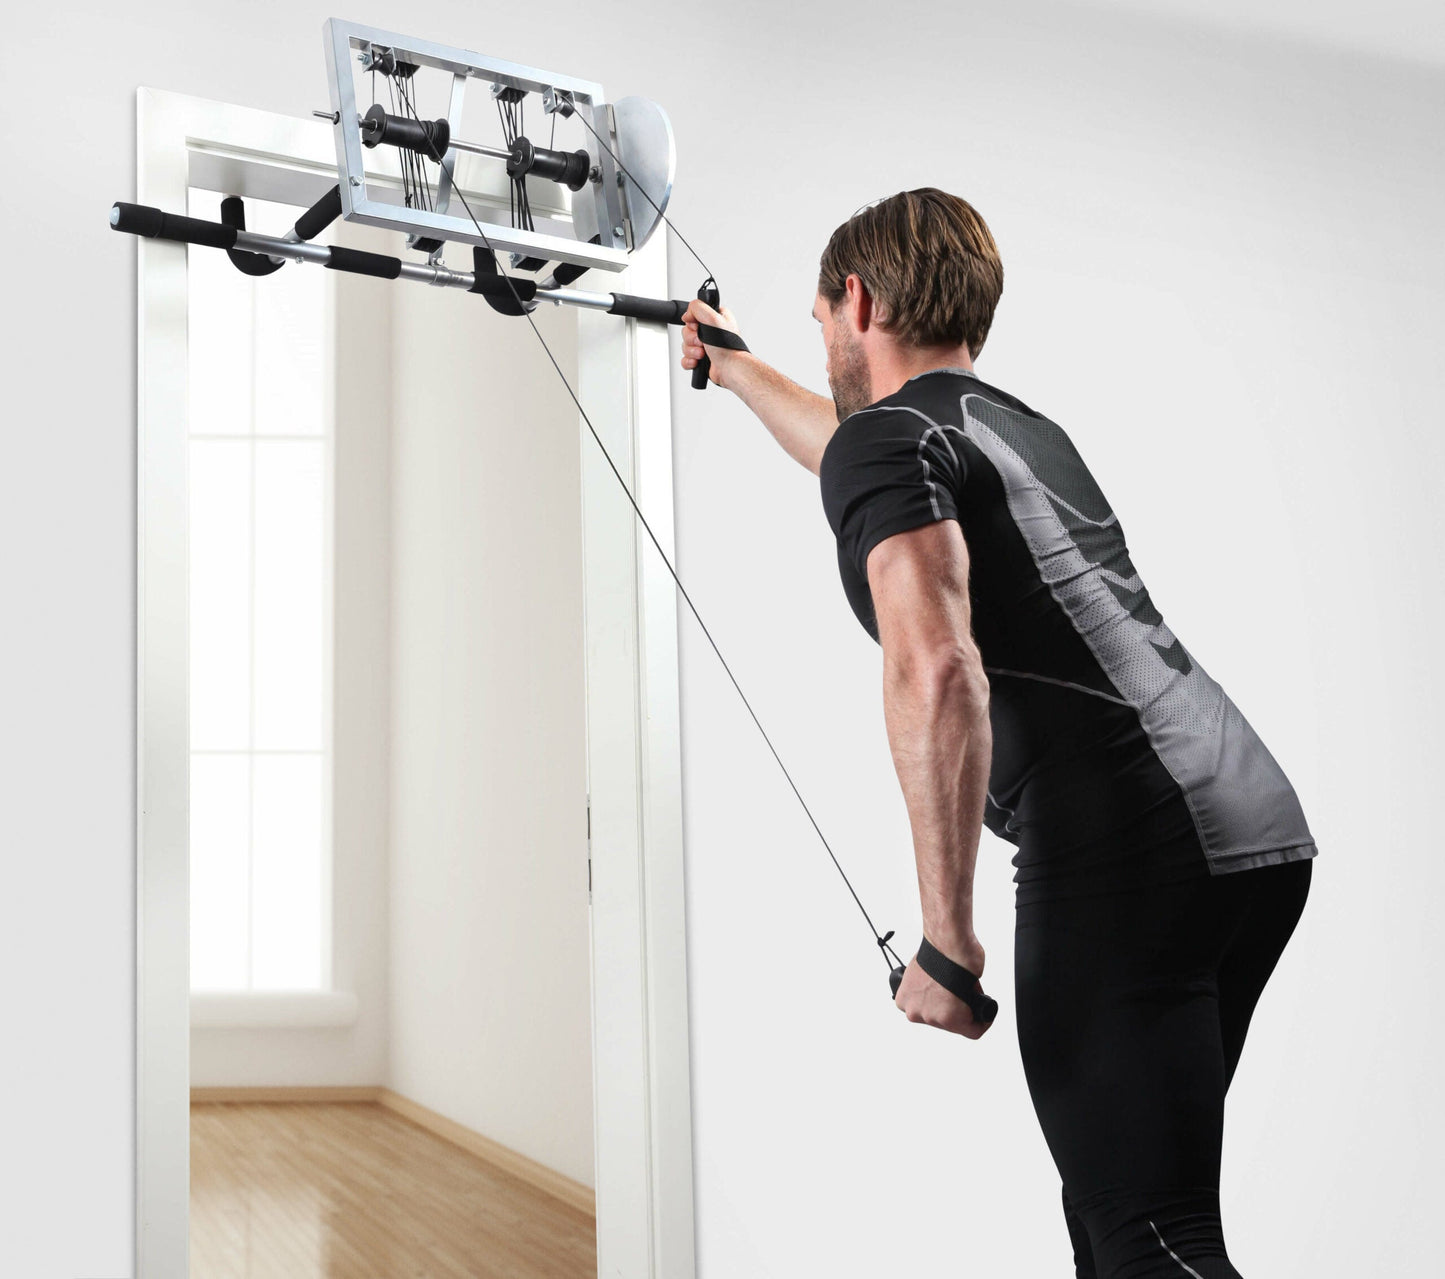 A product picture of the Inski Indoor Ski Trainer